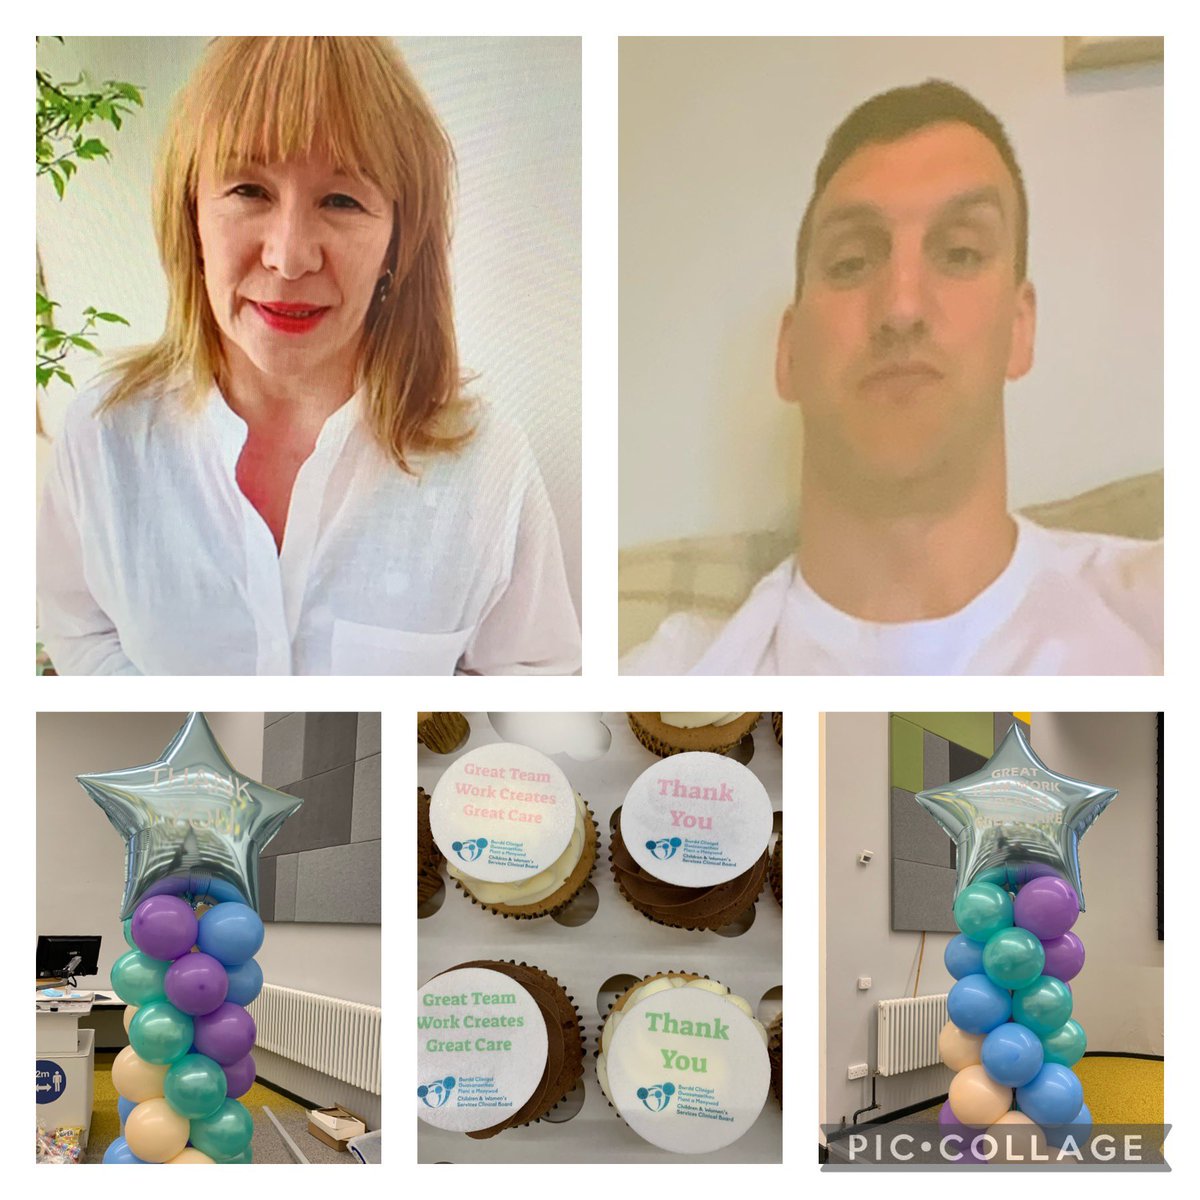 Very special thank you to @SuzRankin @samwarburton_ and the wonderful patients and their families for their messages to all our staff celebrating the fantastic work that they all do on a day to day basis #amazing #soproud #c&wstaffrecognitionevent @CV_UHB @Cath_wood1 @jonesab11